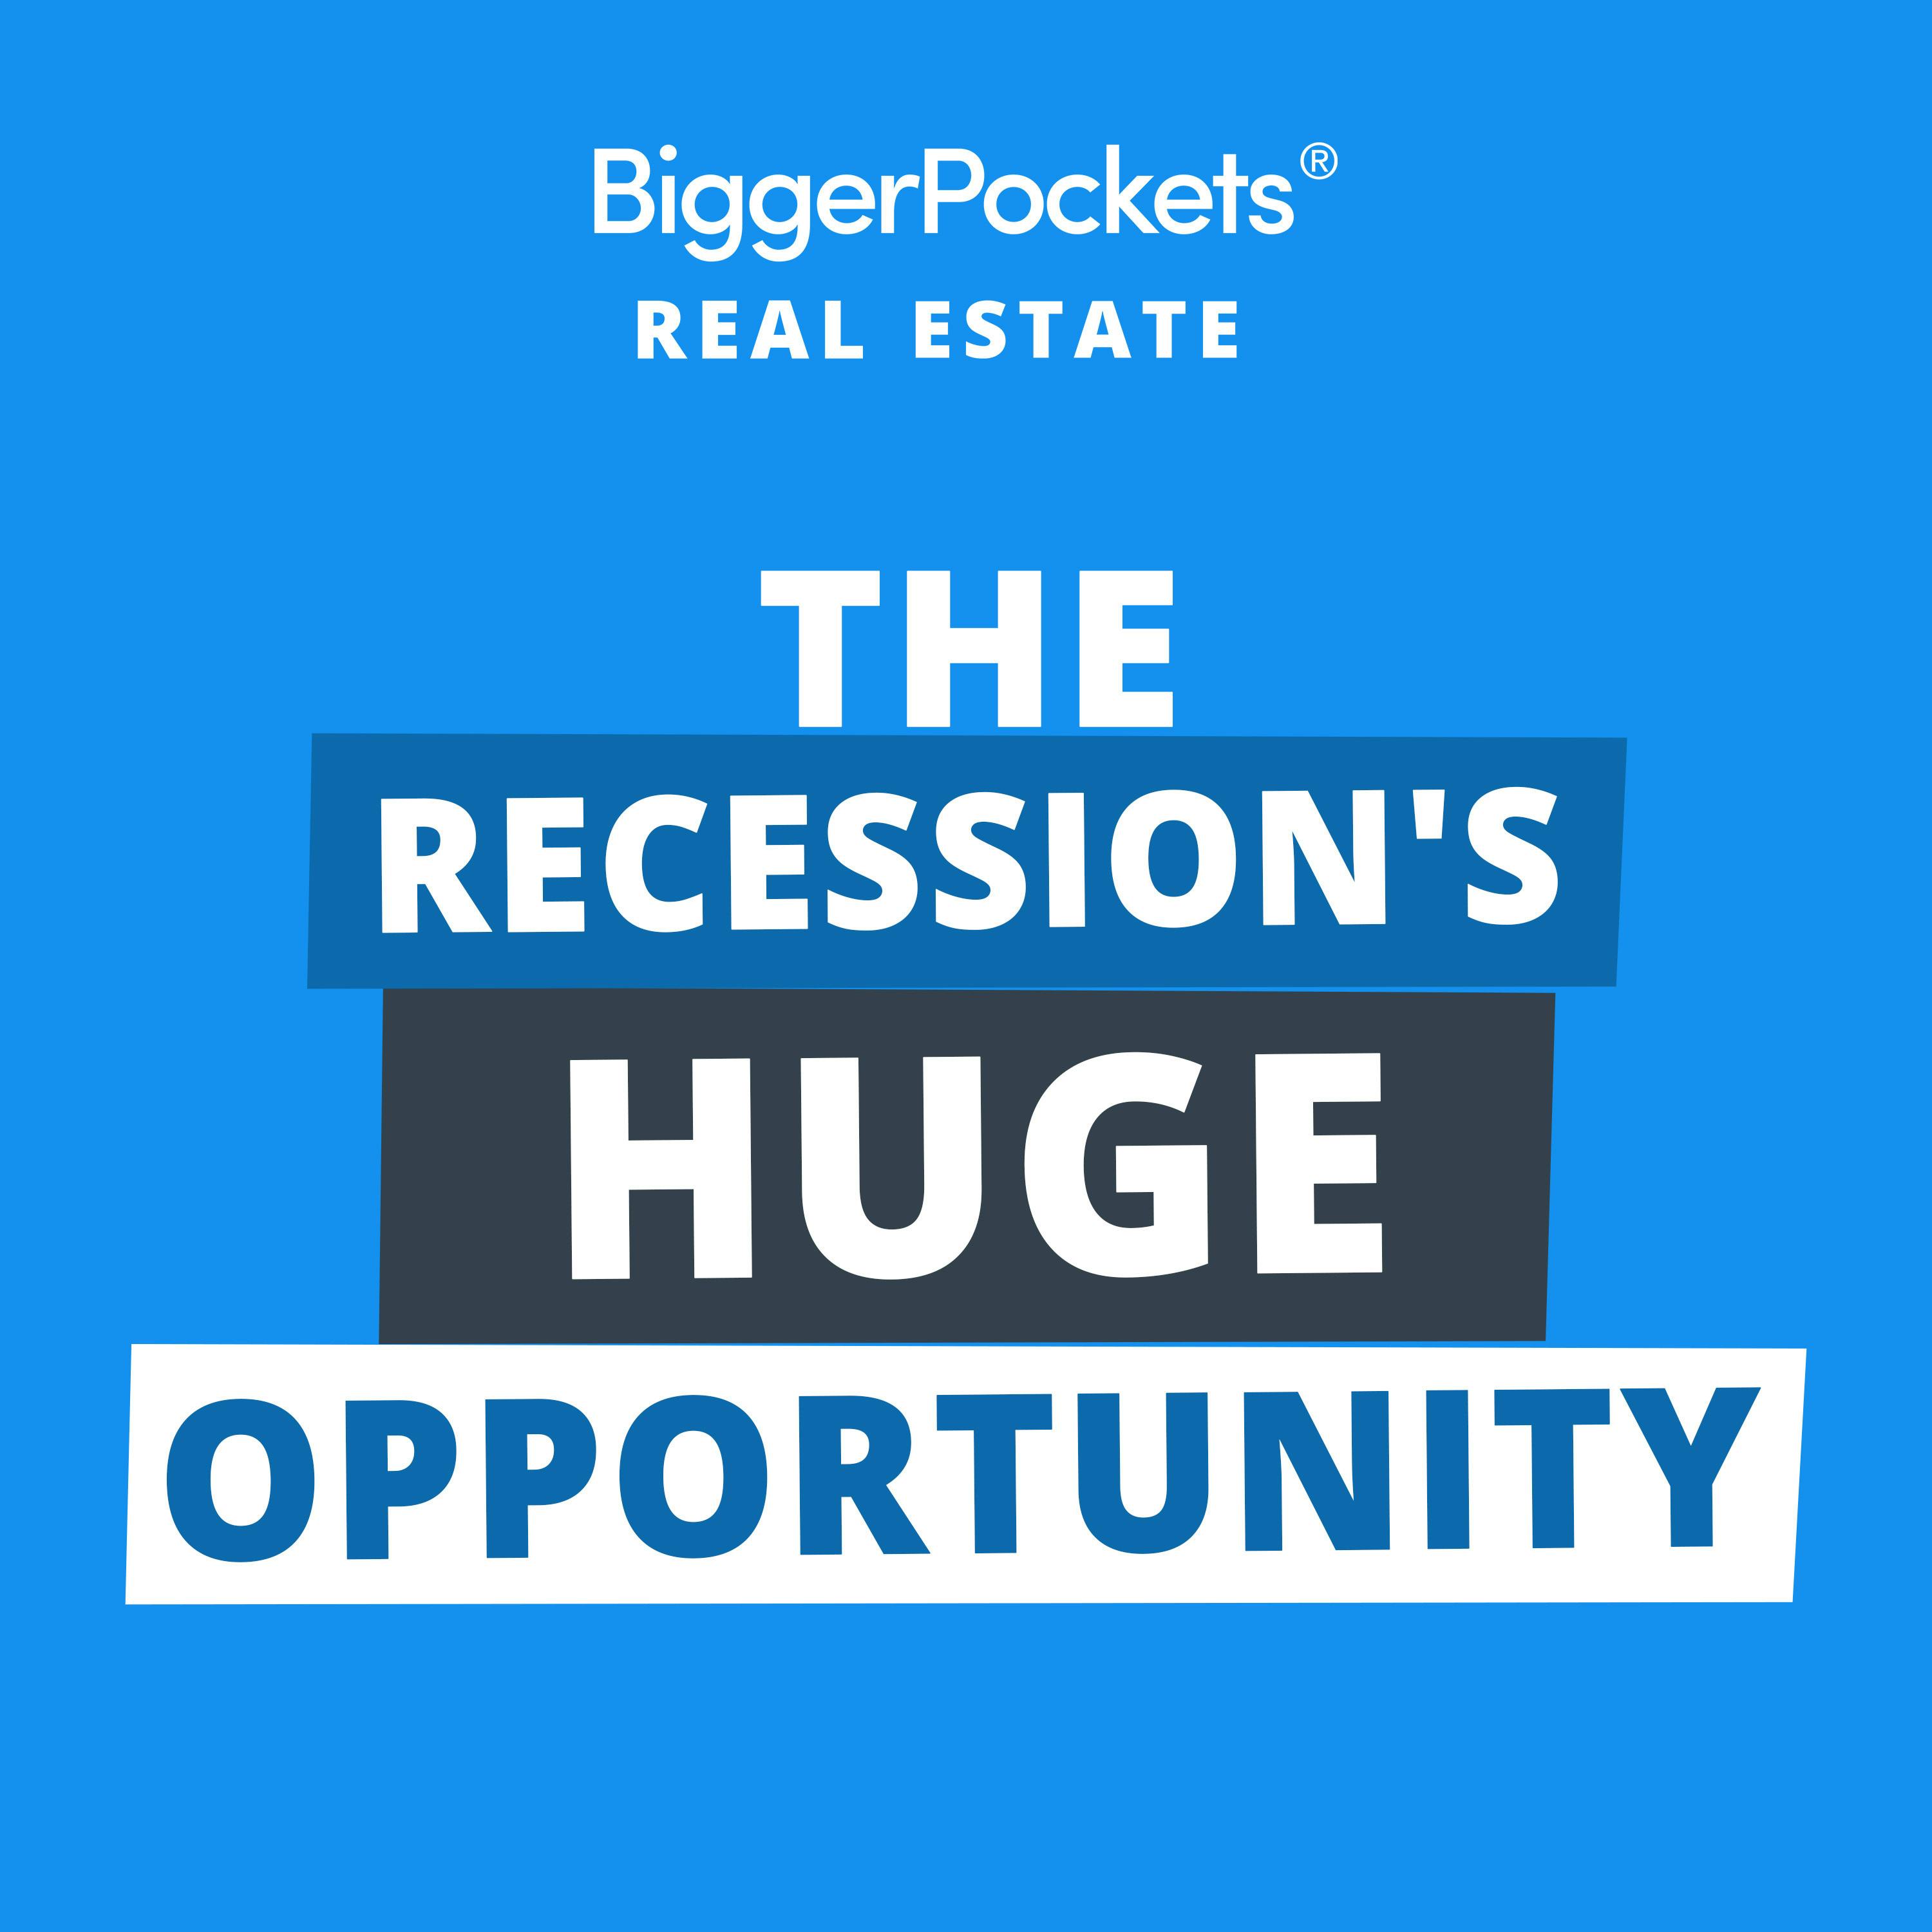 723: Seeing Greene: Why This Recession is a HUGE Opportunity for Investors